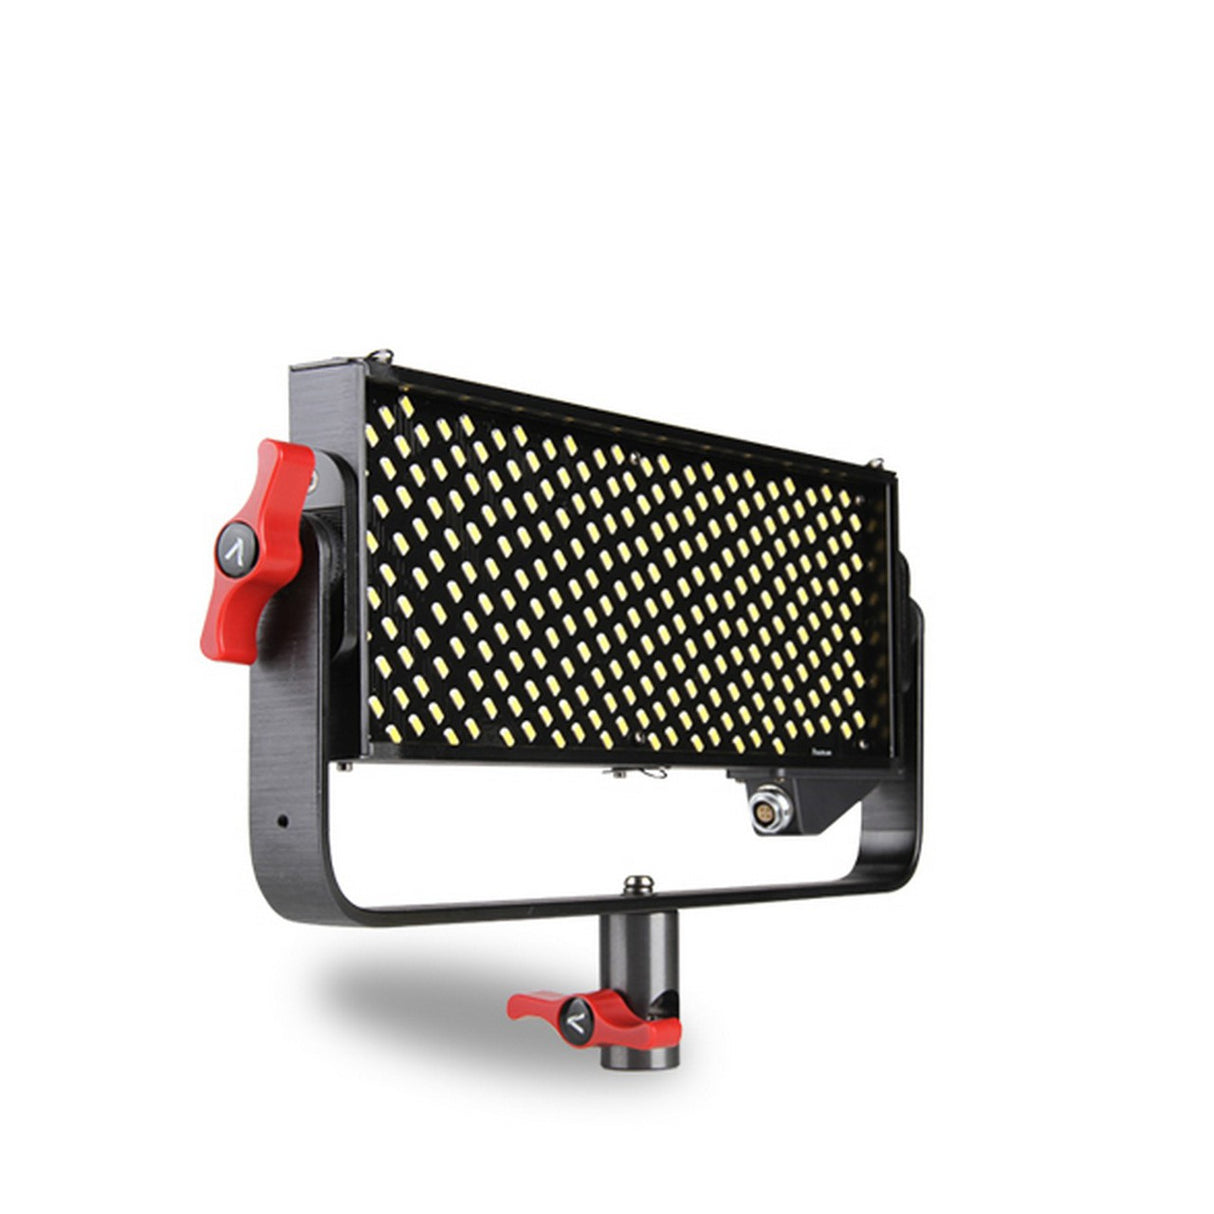 Aputure LS1/2w LightStorm | Aputure LS1/2w Lightstorm Daylight Temp for Sony V-Mount Color Temperature Of 5500K